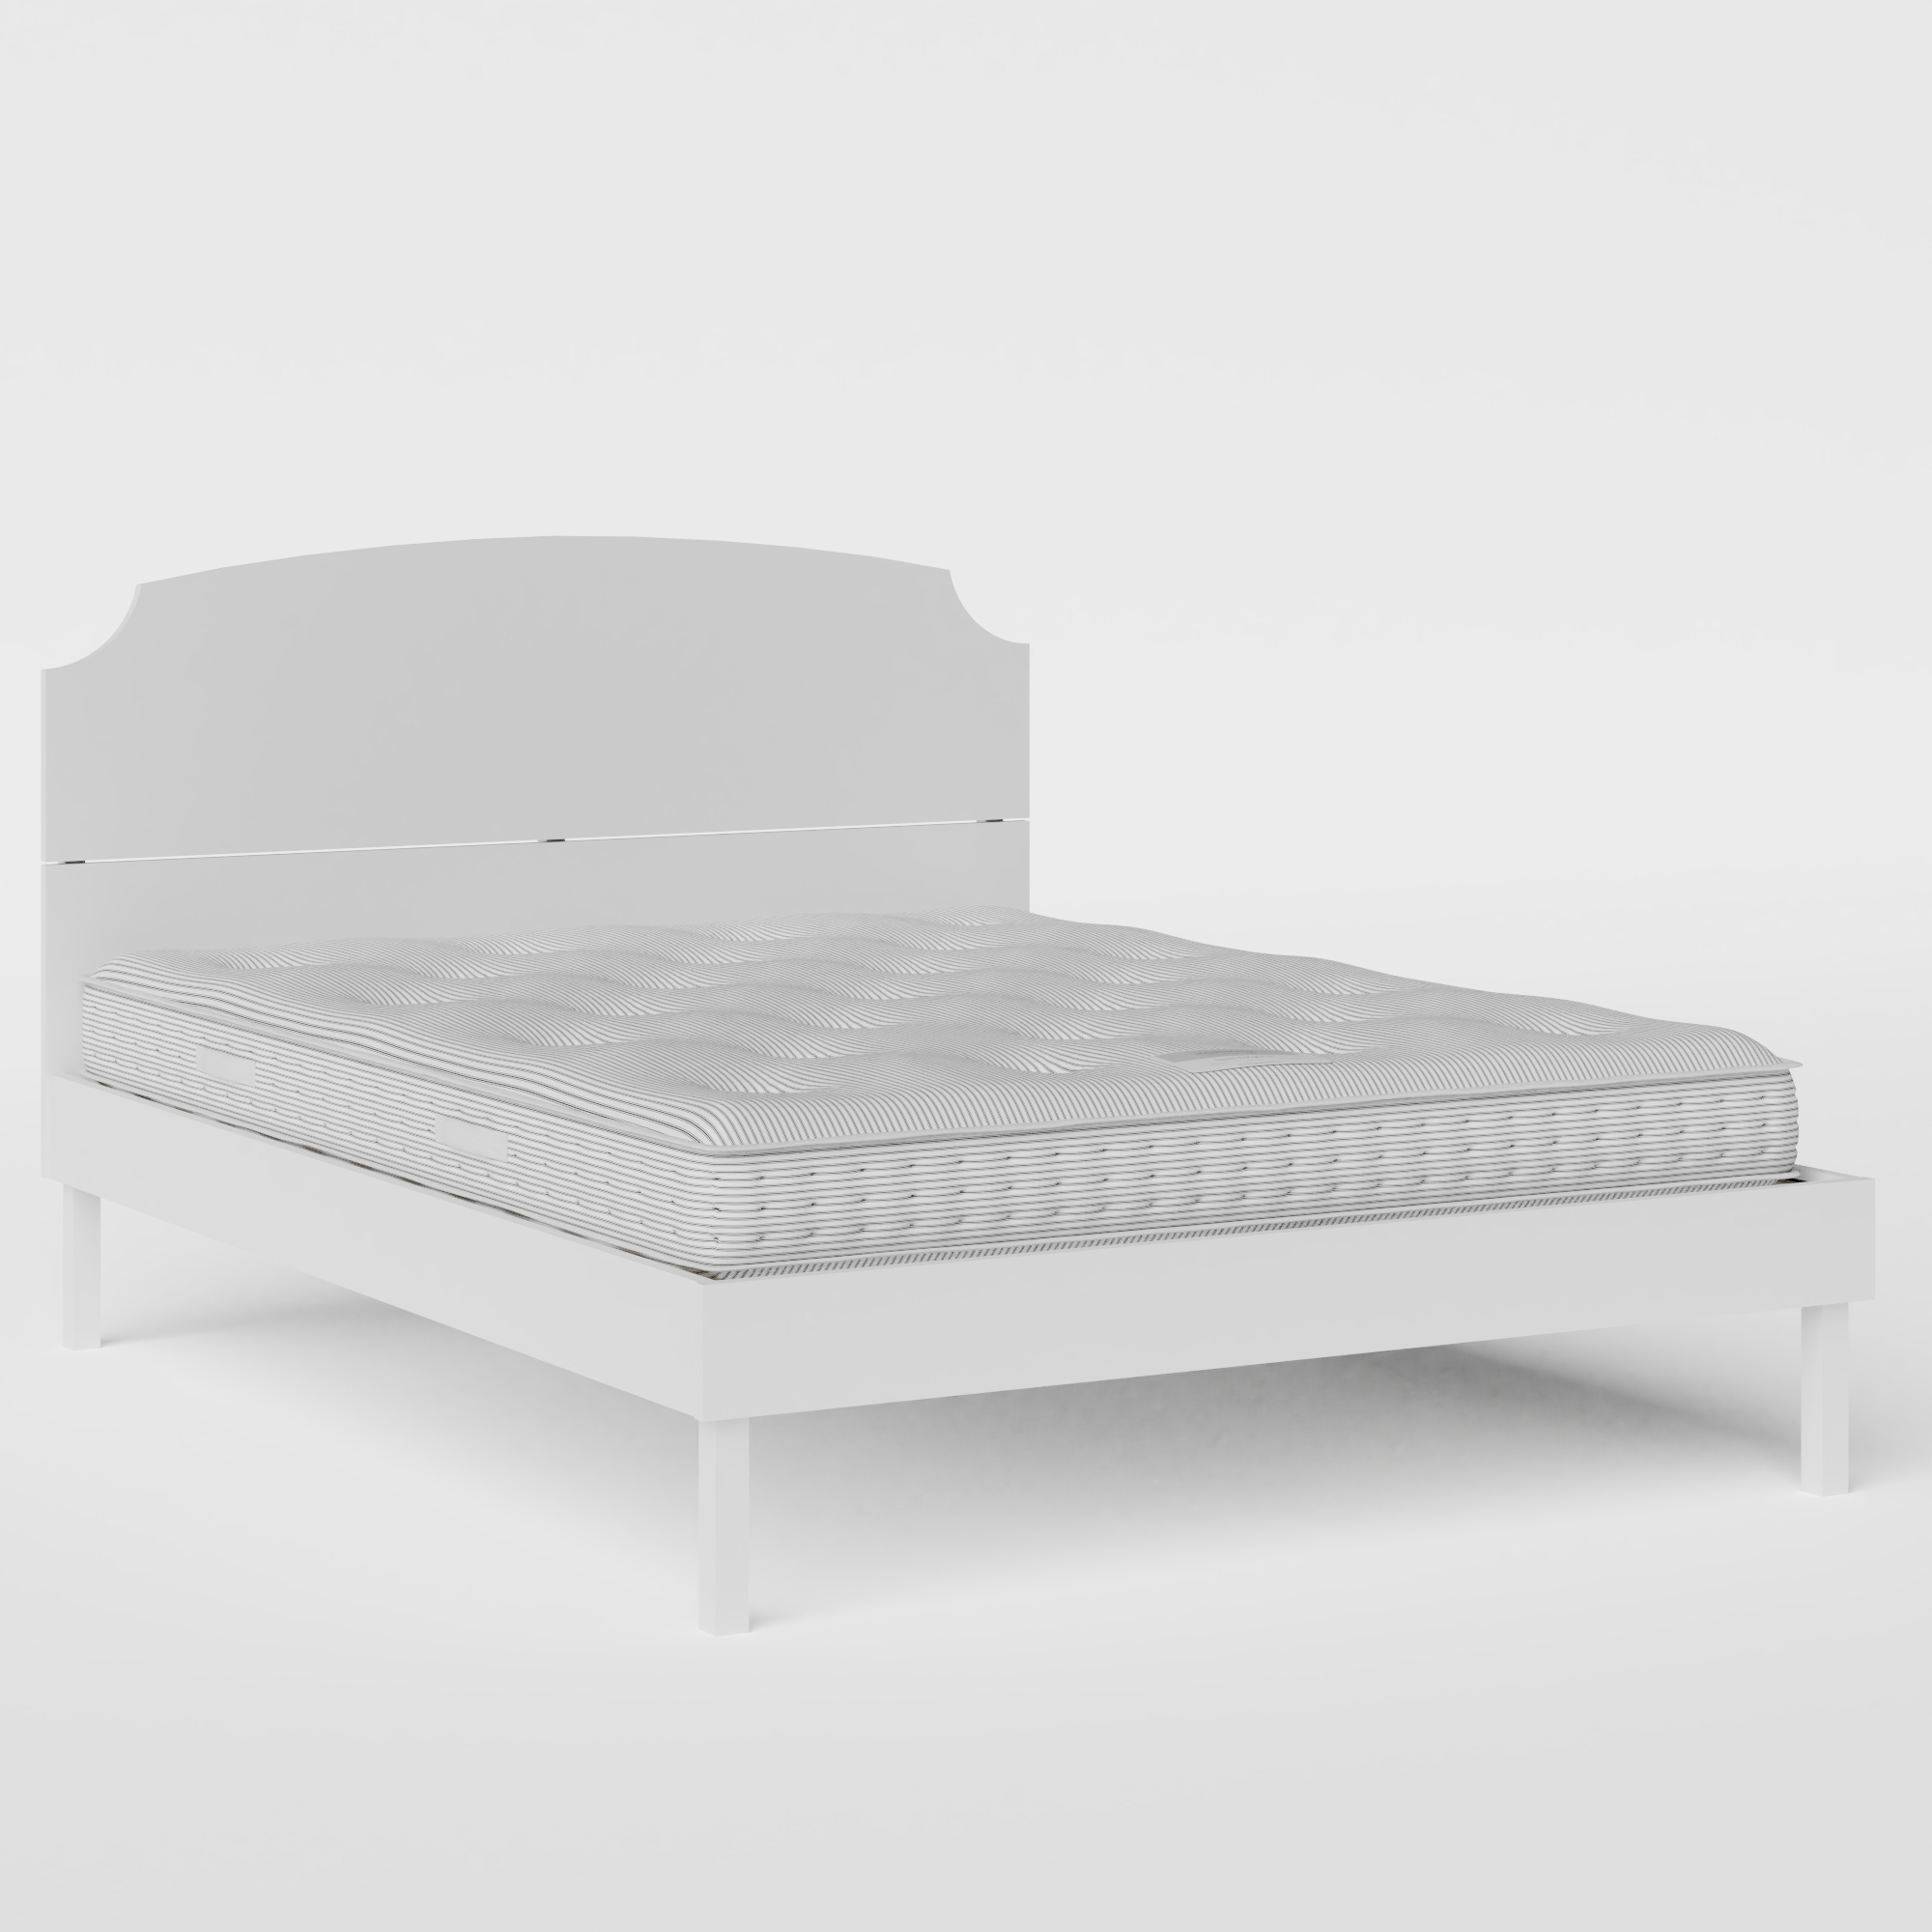 Kobe Painted painted wood bed in white with Juno mattress